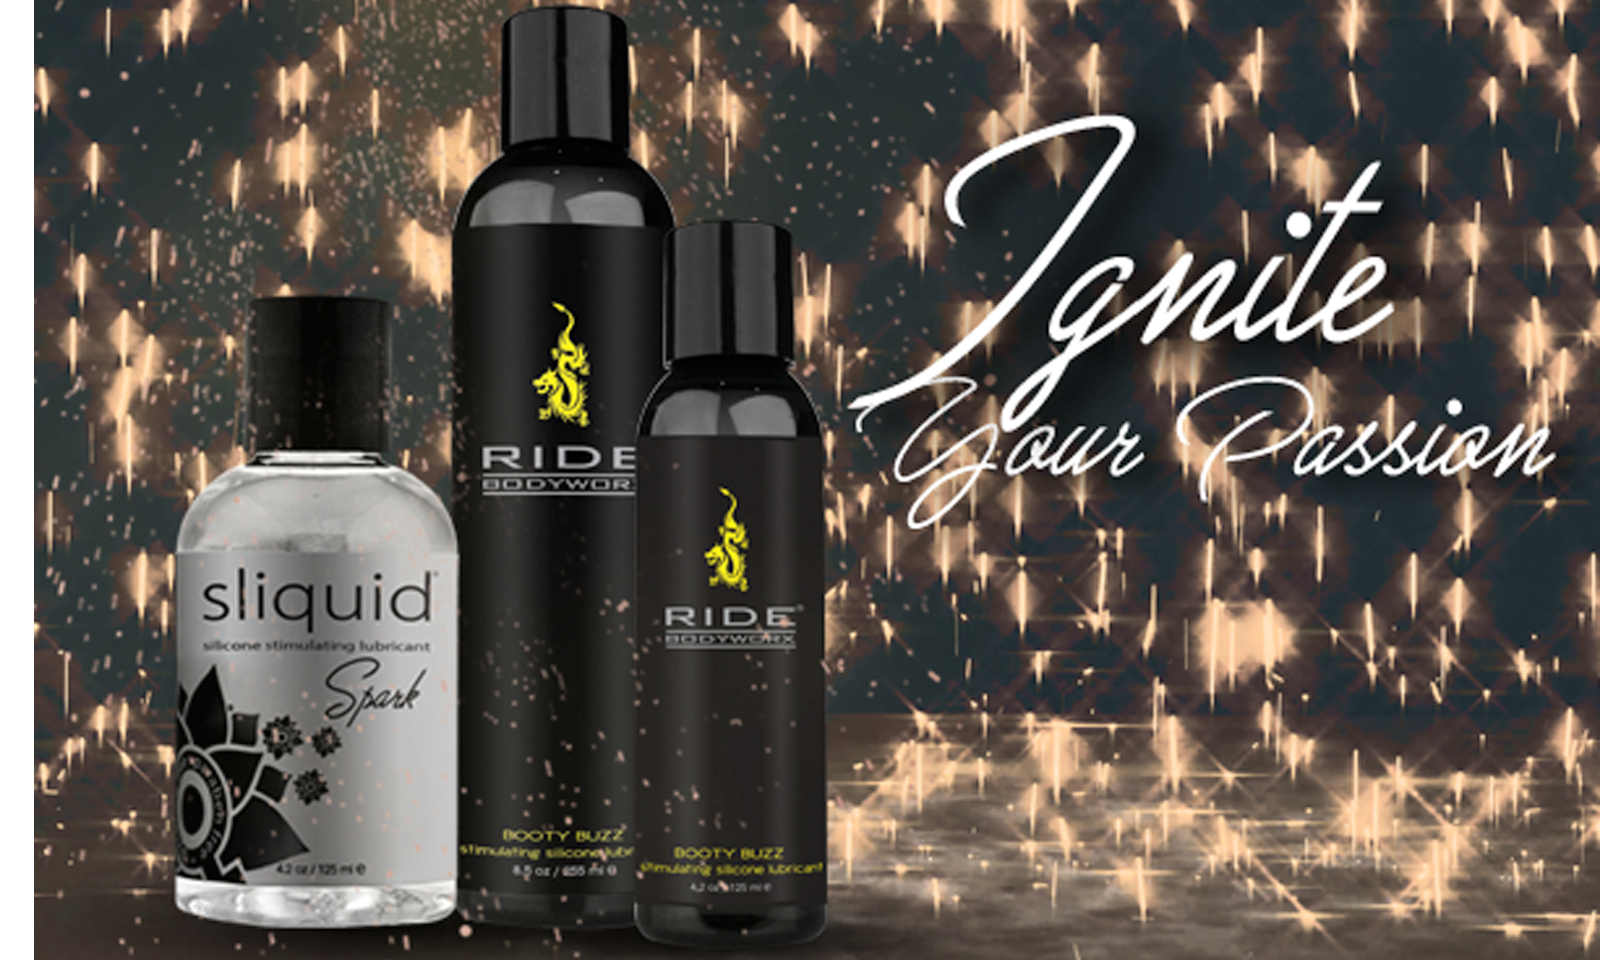 Sliquid Adds Spark, Ride Booty Buzz to Product Lineup